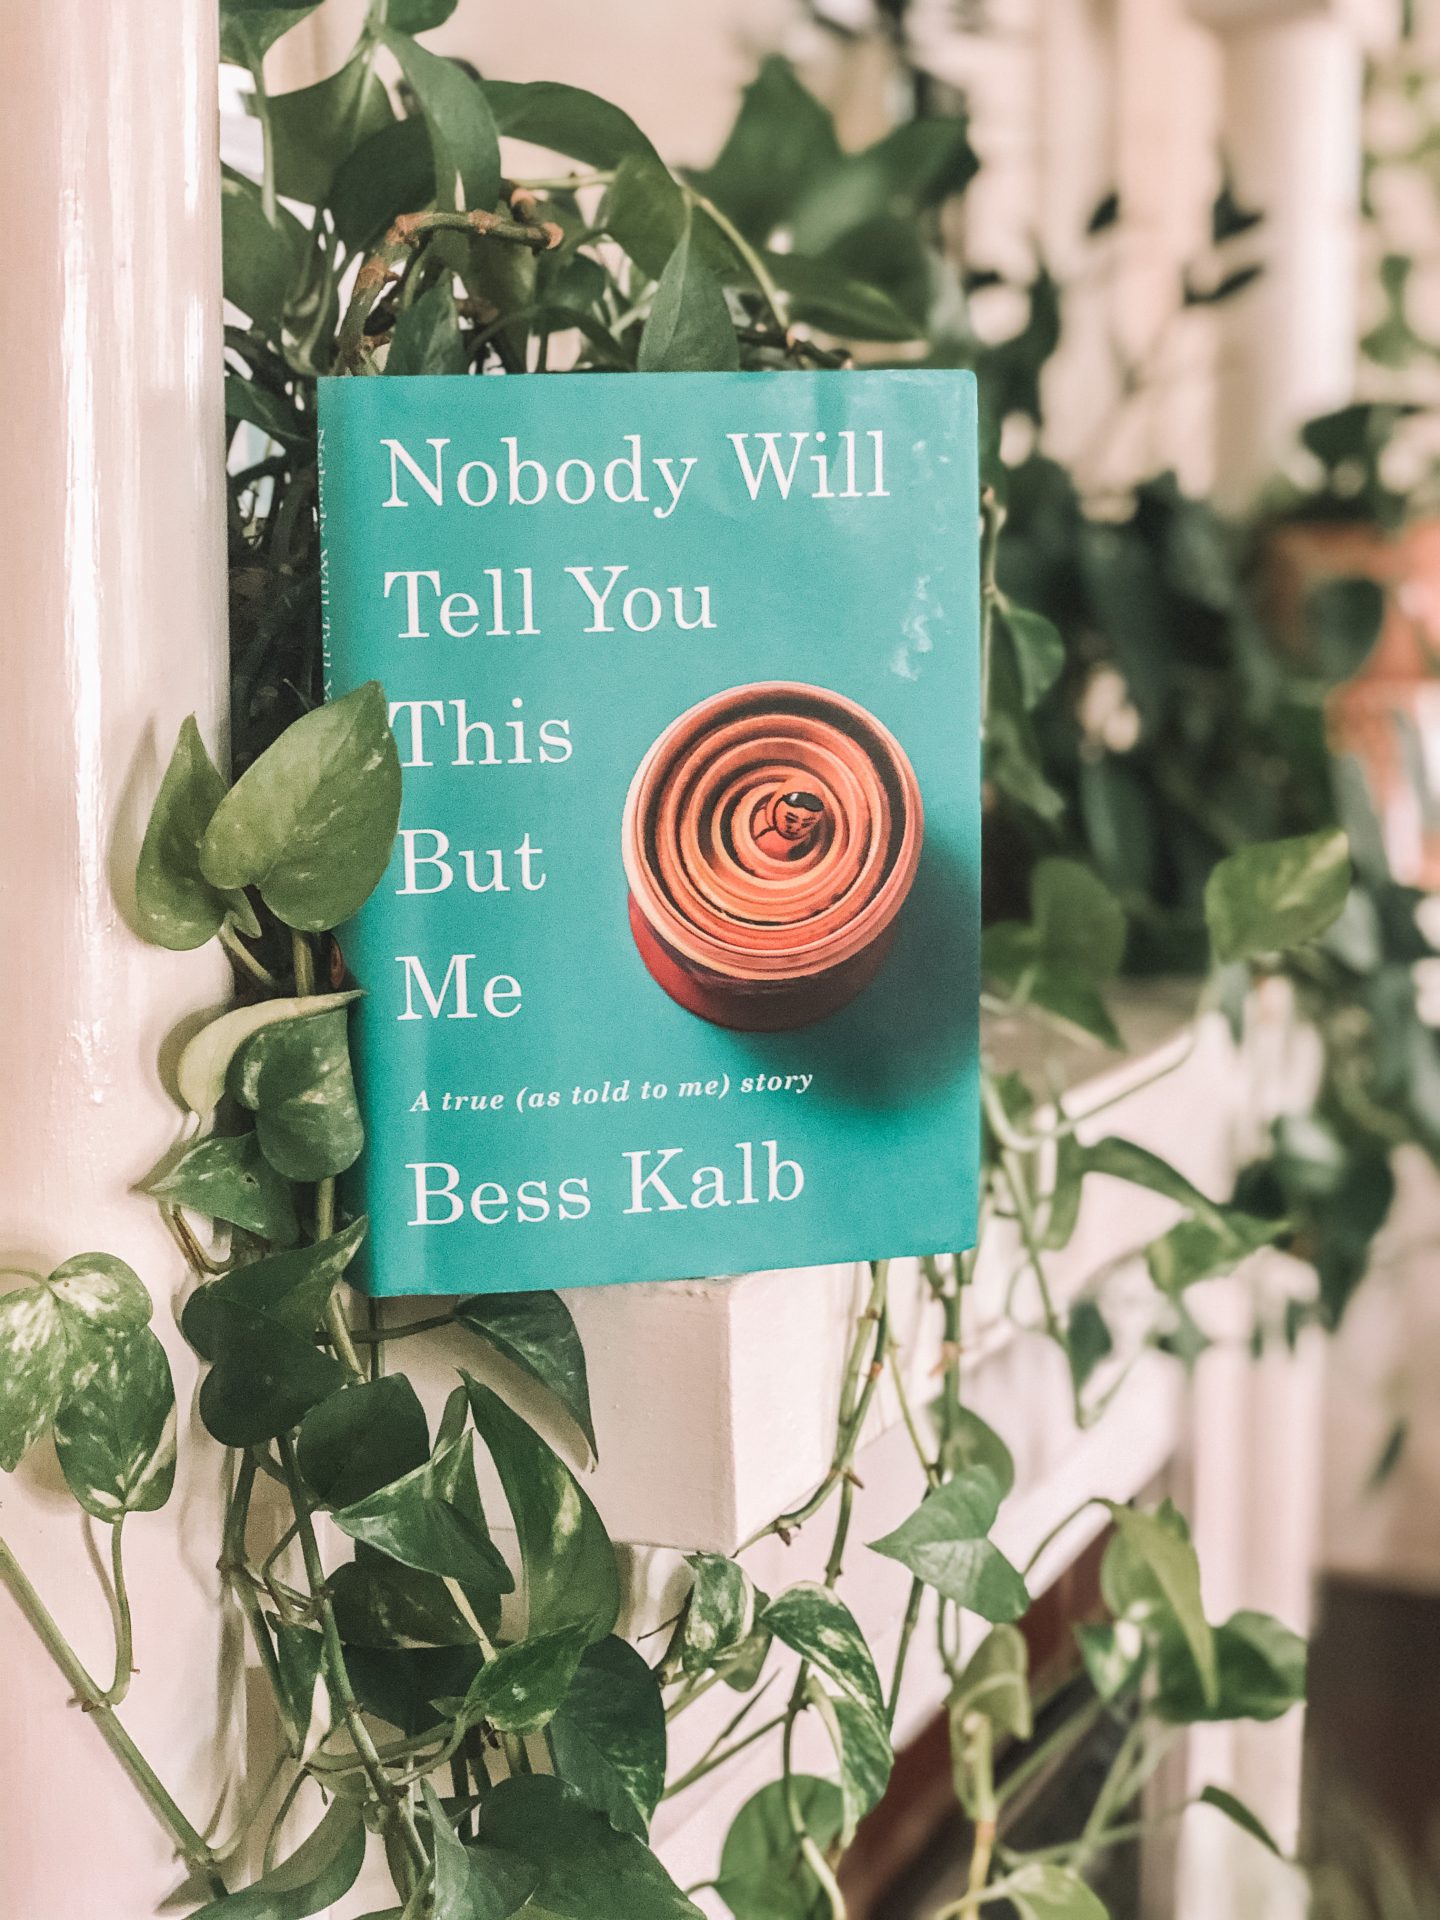 Have you ever read a book that has devastated you to your soul, made you envious, and had you hysterically laughing all within 10 minutes? “Nobody Will Tell You This but Me” by Bess Kalb was this book. Easily my FAVORITE read of the year. This memoir-esque book full of voicemails, phone conversations, and memories was witty and had me sobbing with snot running but like in a good way. At its heart, the book is about a grandmother and granddaughter’s relationship- the willingness to drop everything when needed, the well-intentioned but never asked for advice, and the love so clear and evident. It’s a beautiful journey I never wanted to end. This book is perfect for those who had those relationships with their grandmothers or who didn’t (like me).